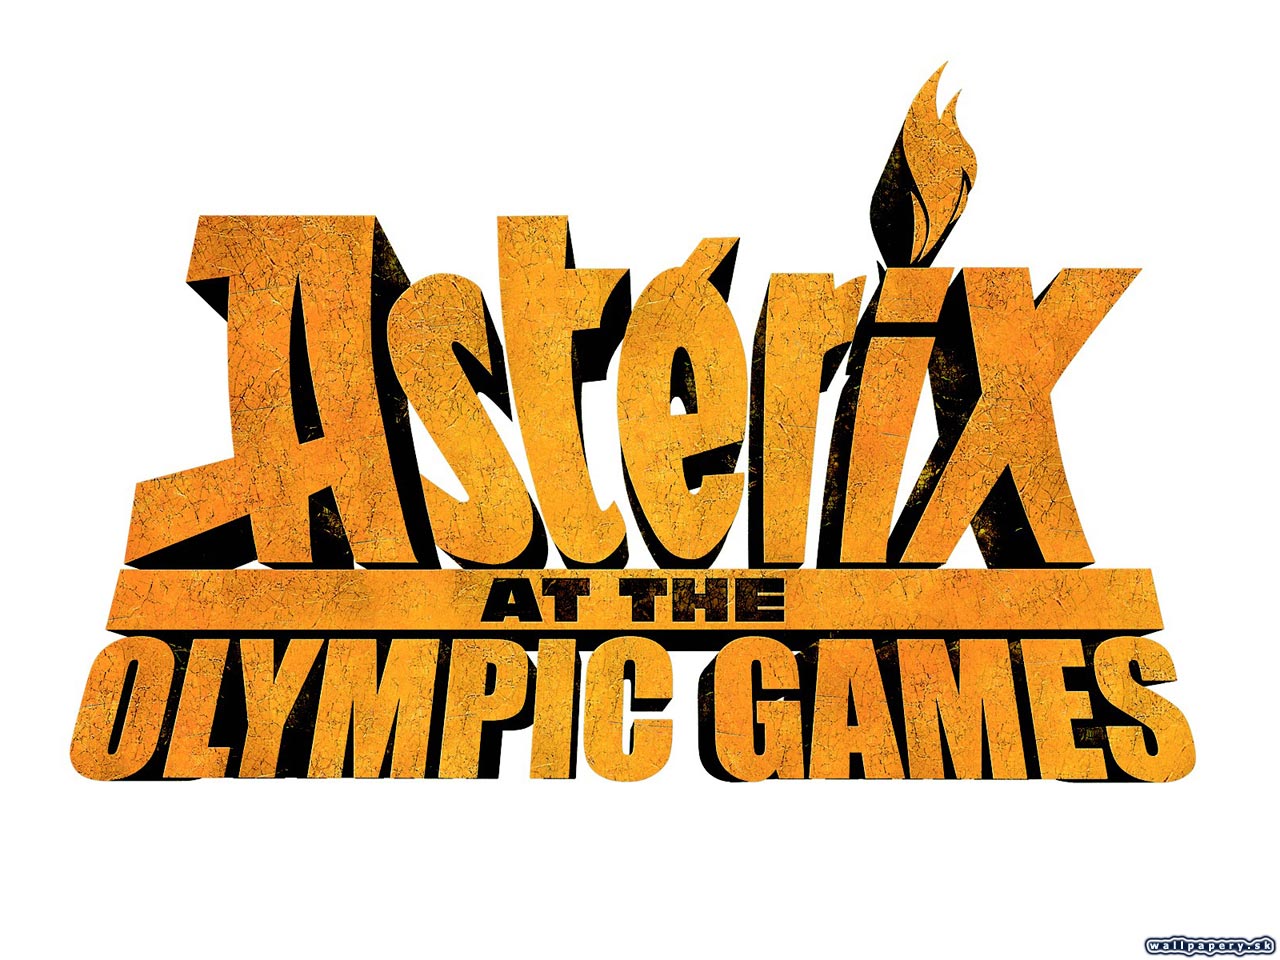 Asterix at the Olympic Games - wallpaper 3